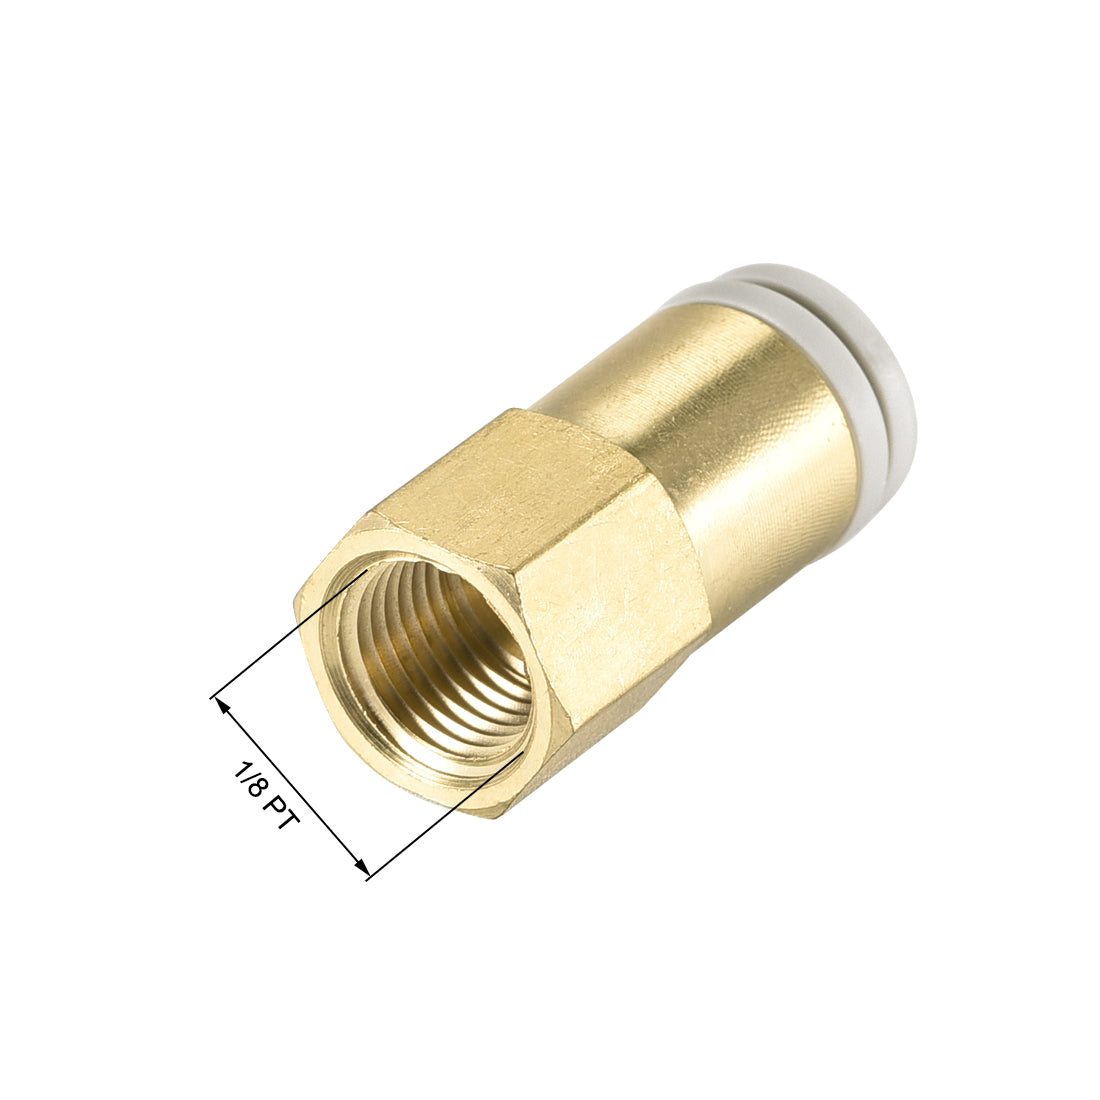 uxcell Uxcell Push to Connect Tube Fittings 6mm Tube OD x 1/8 PT Female Golden Tone